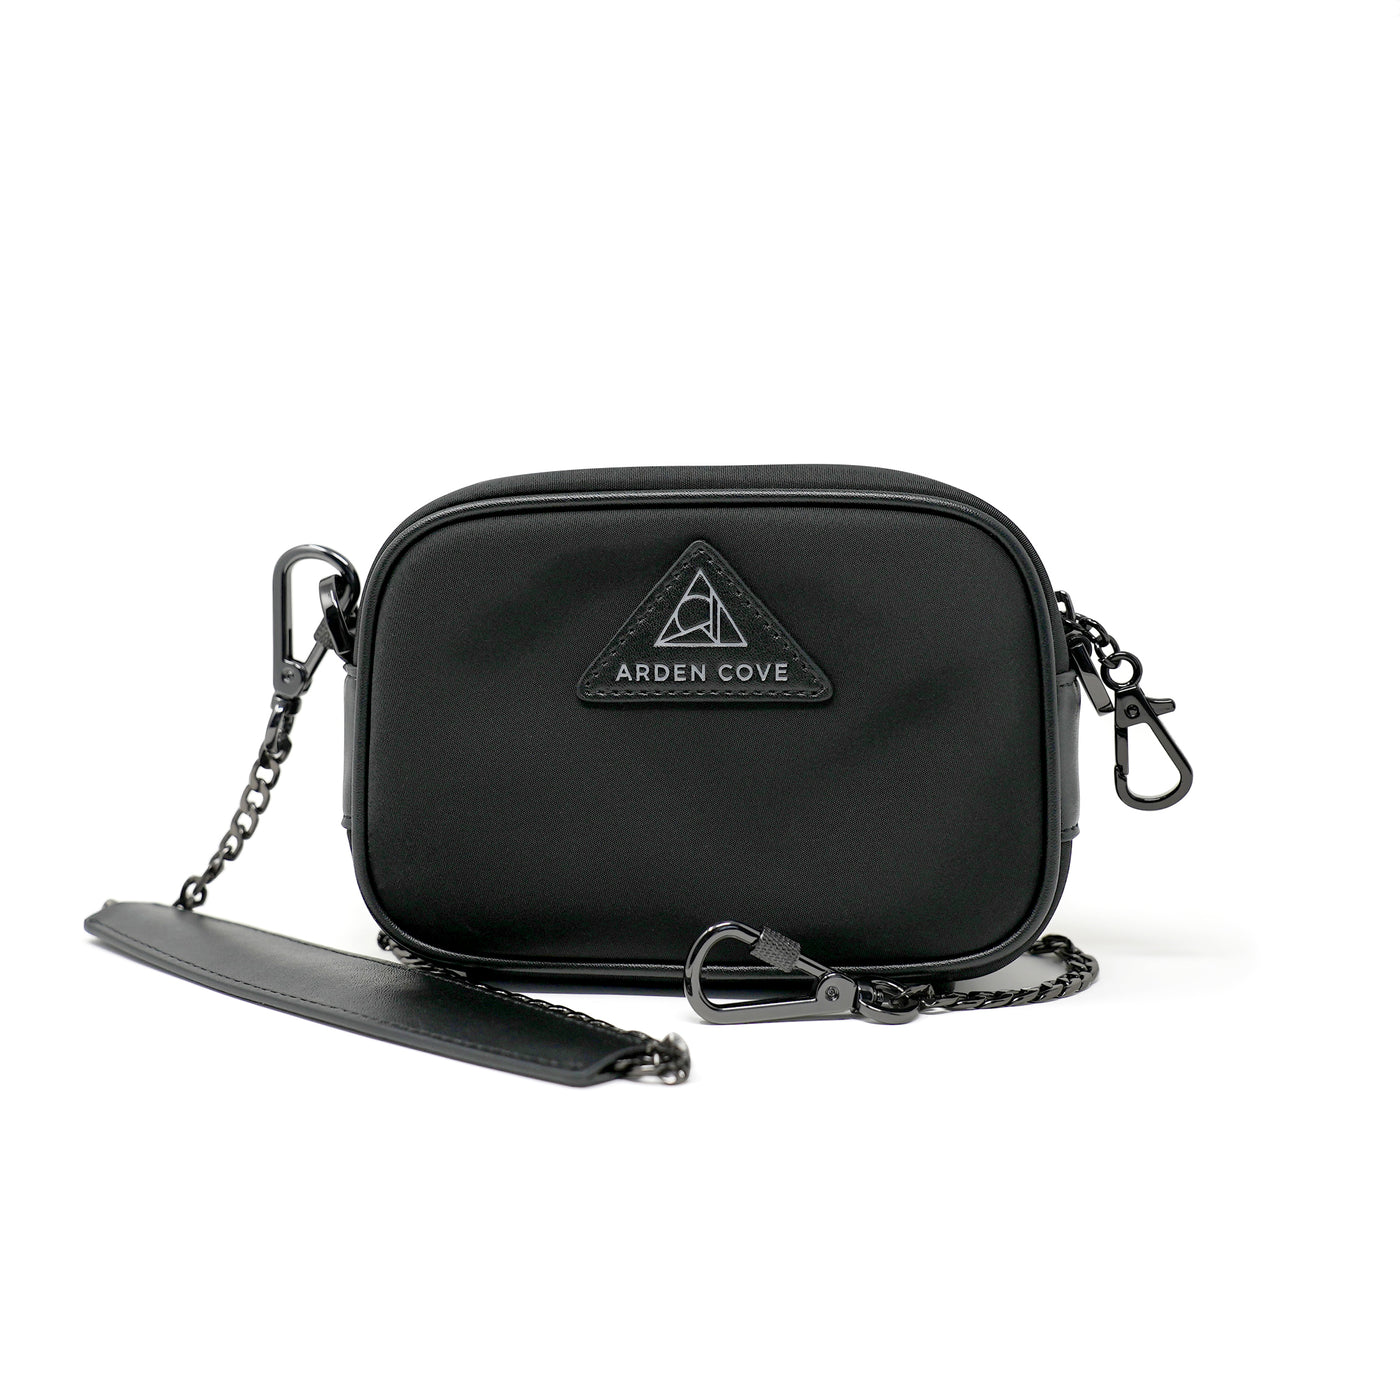 Anti-theft Water-resistant Travel Crossbody - Crissy Mini Crossbody in Black Gunmetal with slash-resistant chain & locking clasps straps - front view - Arden Cove